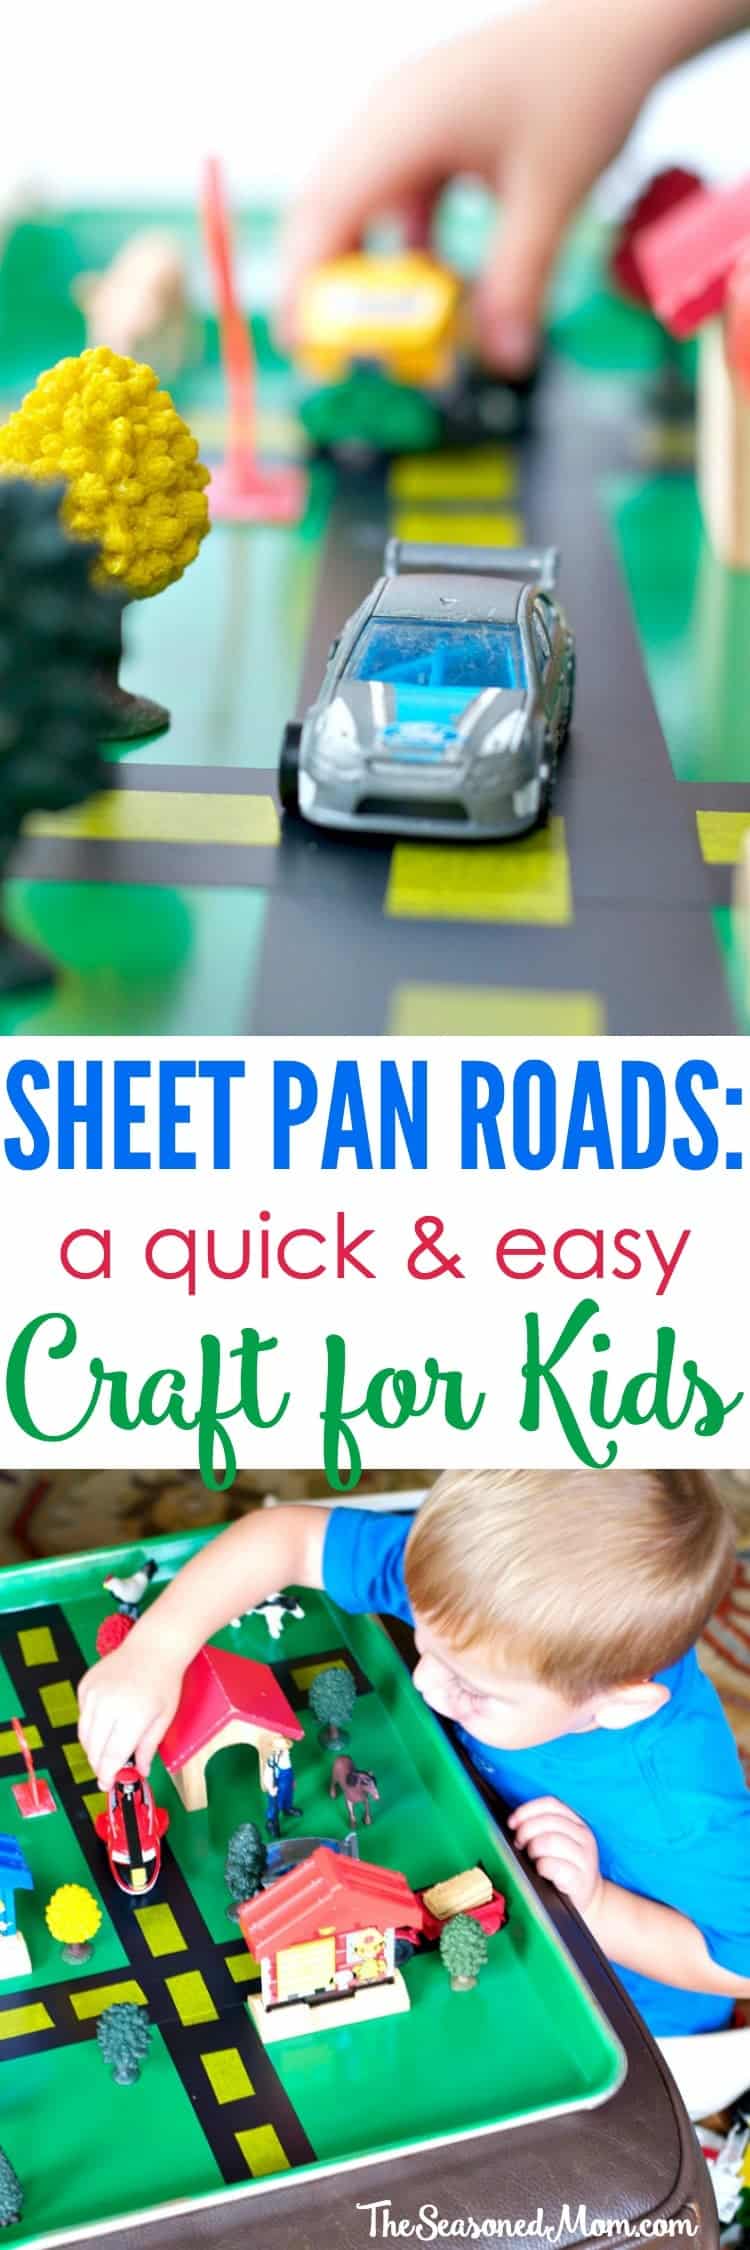 Sheet Pan Roads are an easy Homemade Gift for Kids!